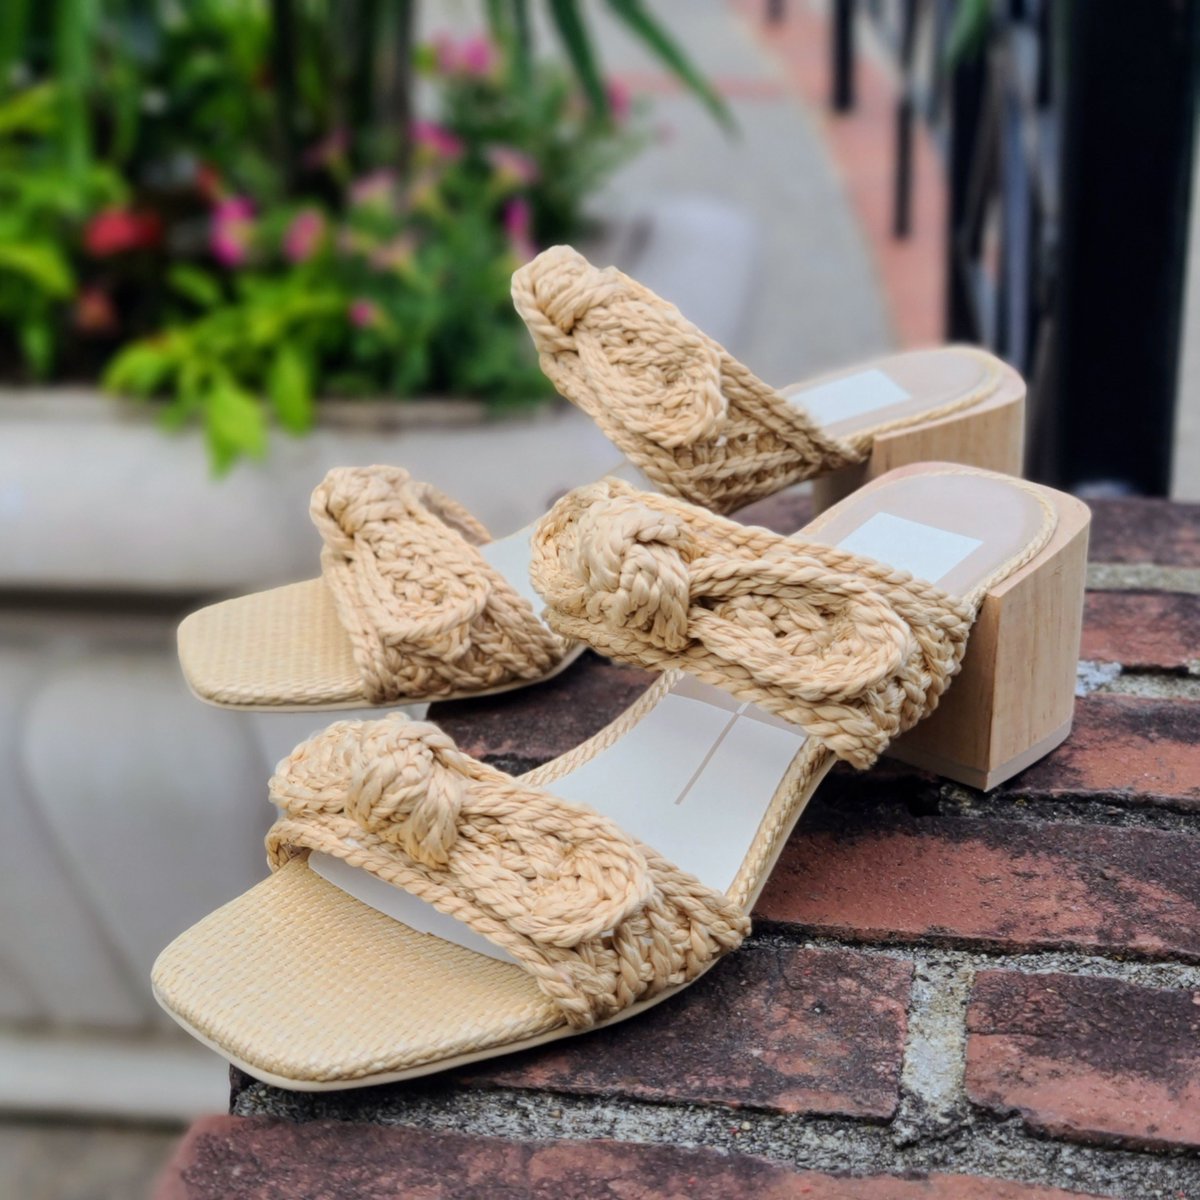 An all-day heel that doubles as your new favorite nighttime look!

Shop Zemmie In-Store and Yarids.com

#yarids #dolcevita #sandals #heels #shoes #shoeoftheday #shoelover #shoplocal #supportsmallbusiness #shopnow